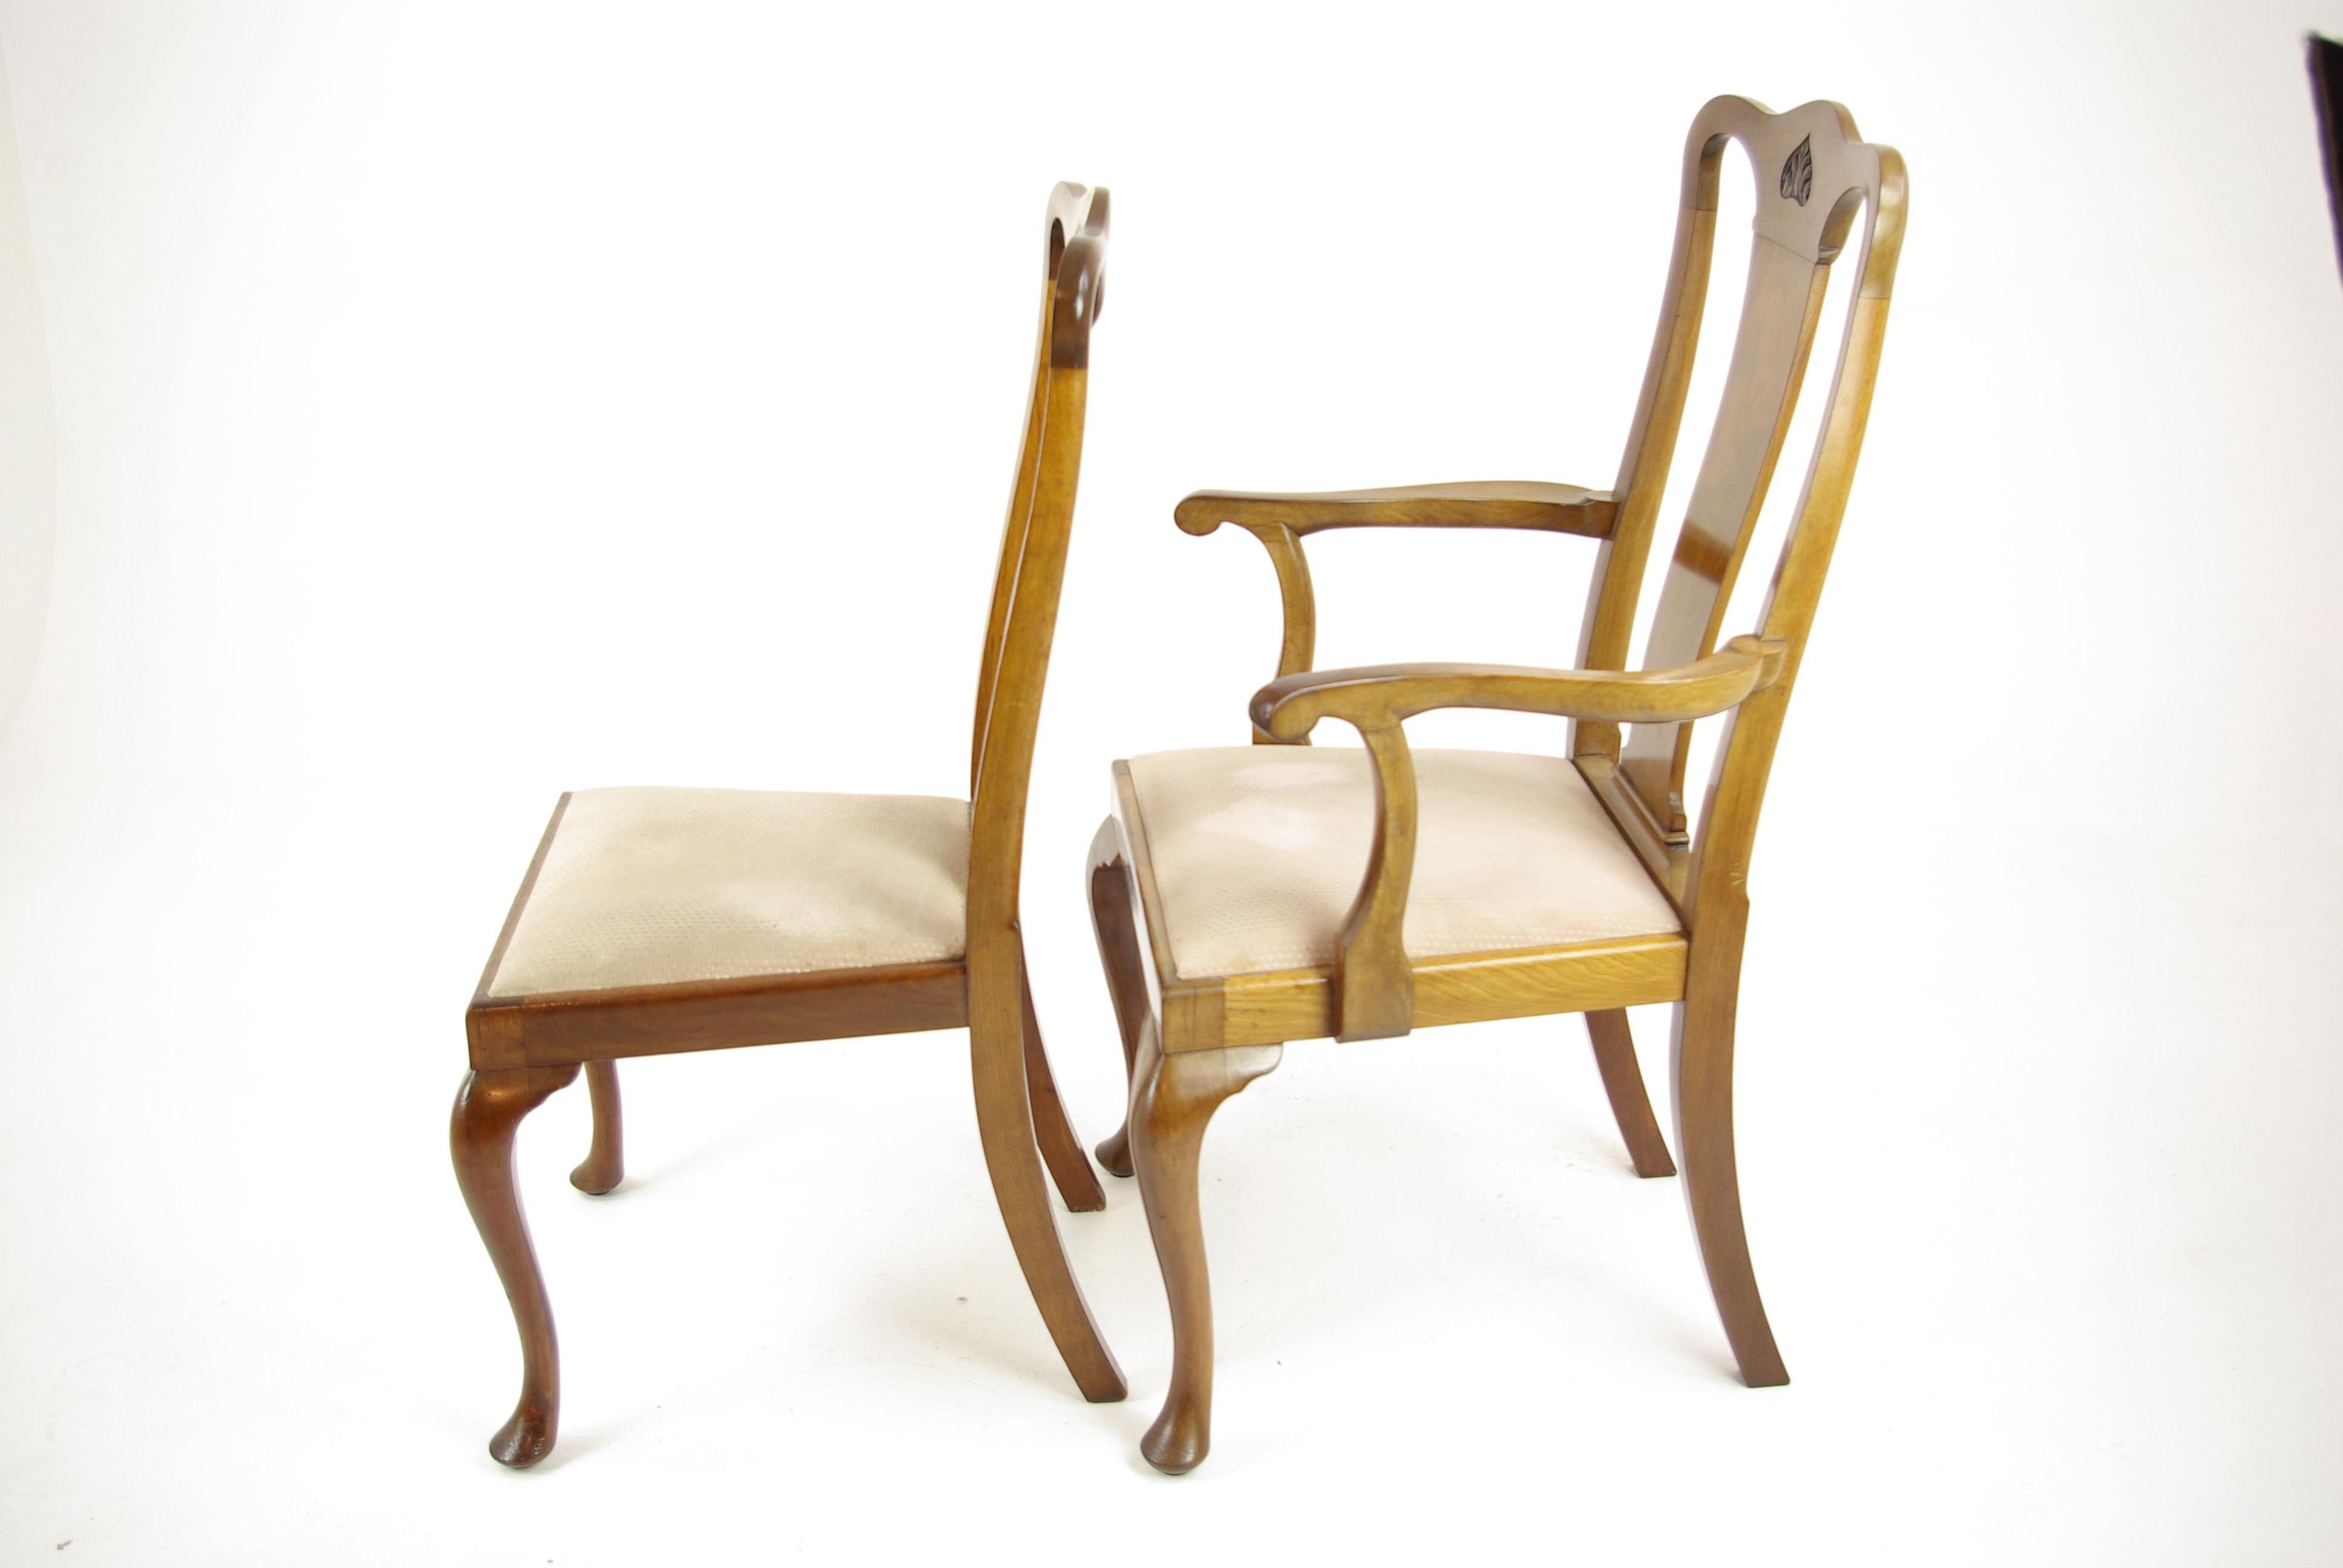 Hand-Crafted Antique Walnut Chairs, Queen Anne Chairs, 7 Dining Chairs, Scotland 1920, B1196